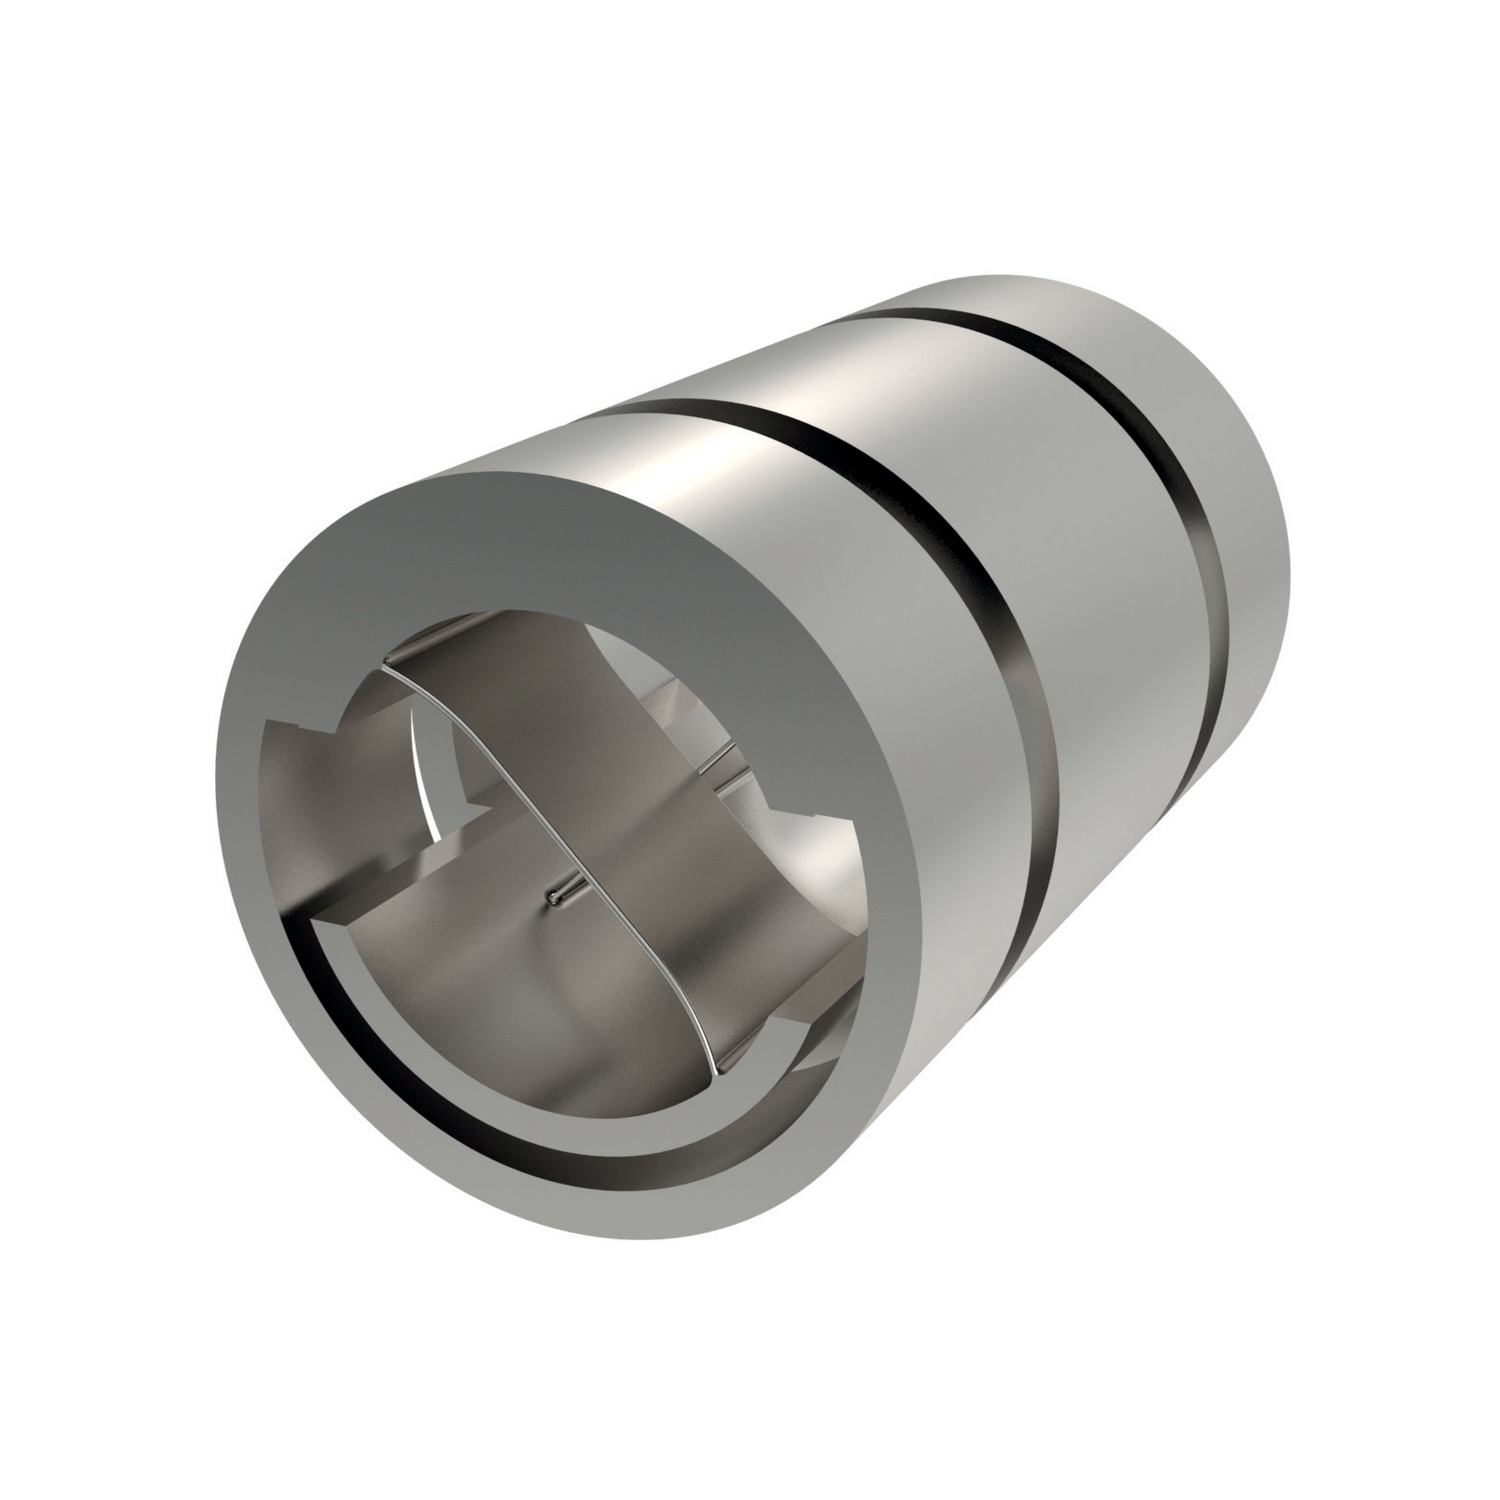 Product R4002, Flexure Pivot Bearings double-ended / 